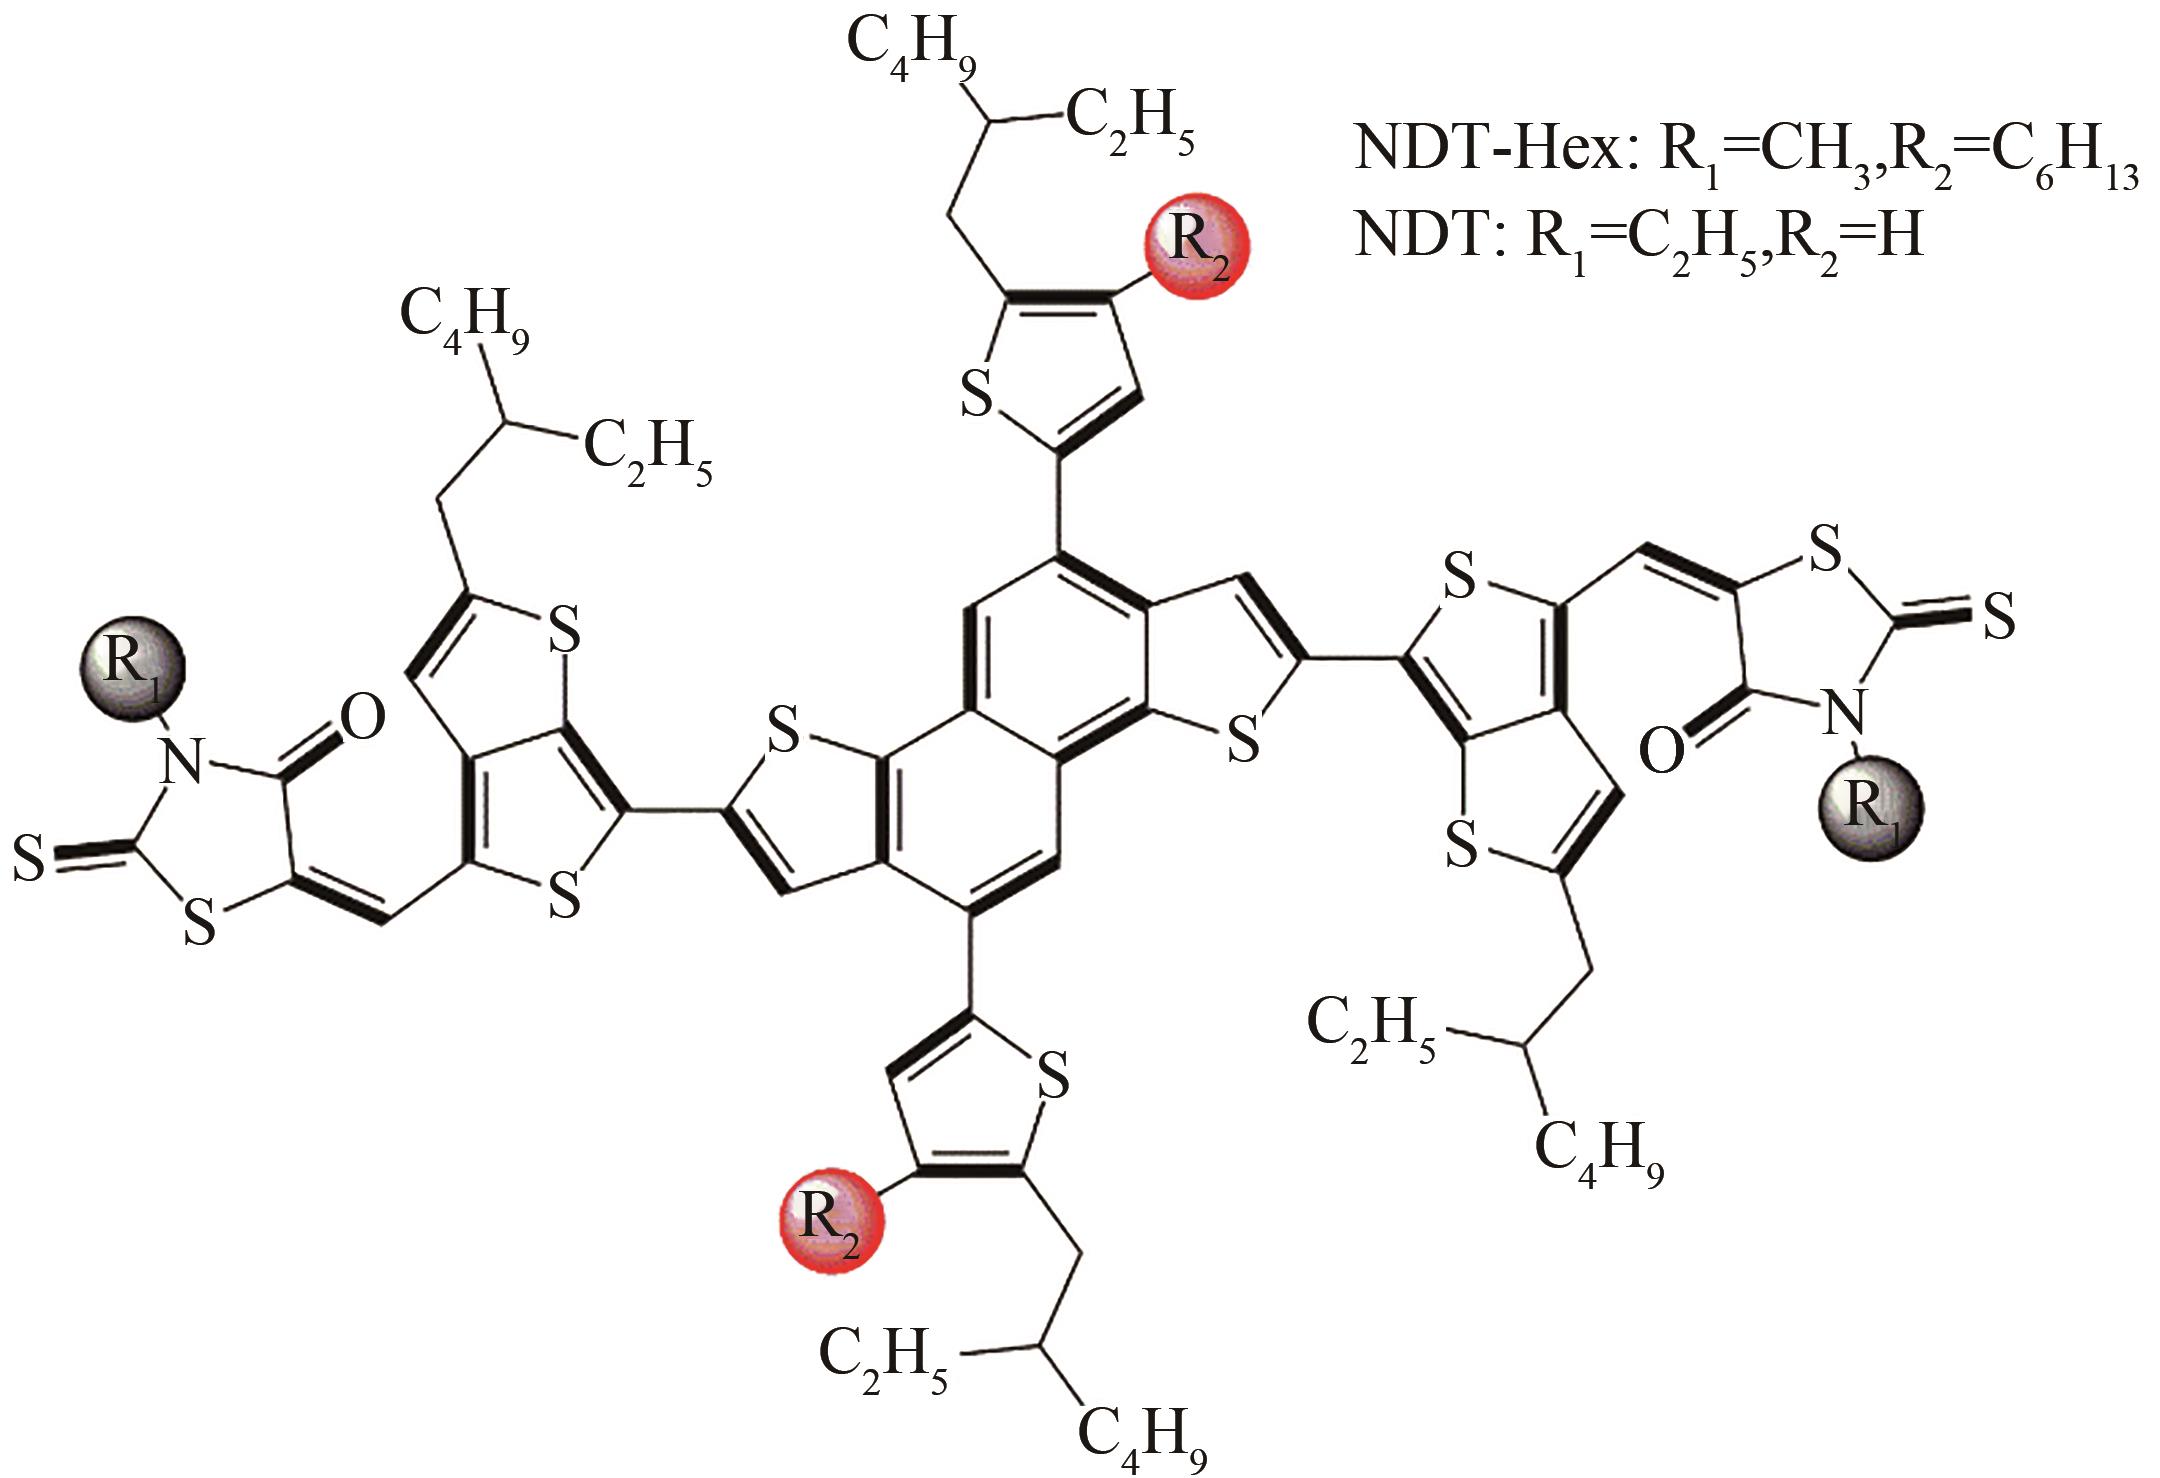 Chemical structure of NDT and NDT-Hex small molecule donors